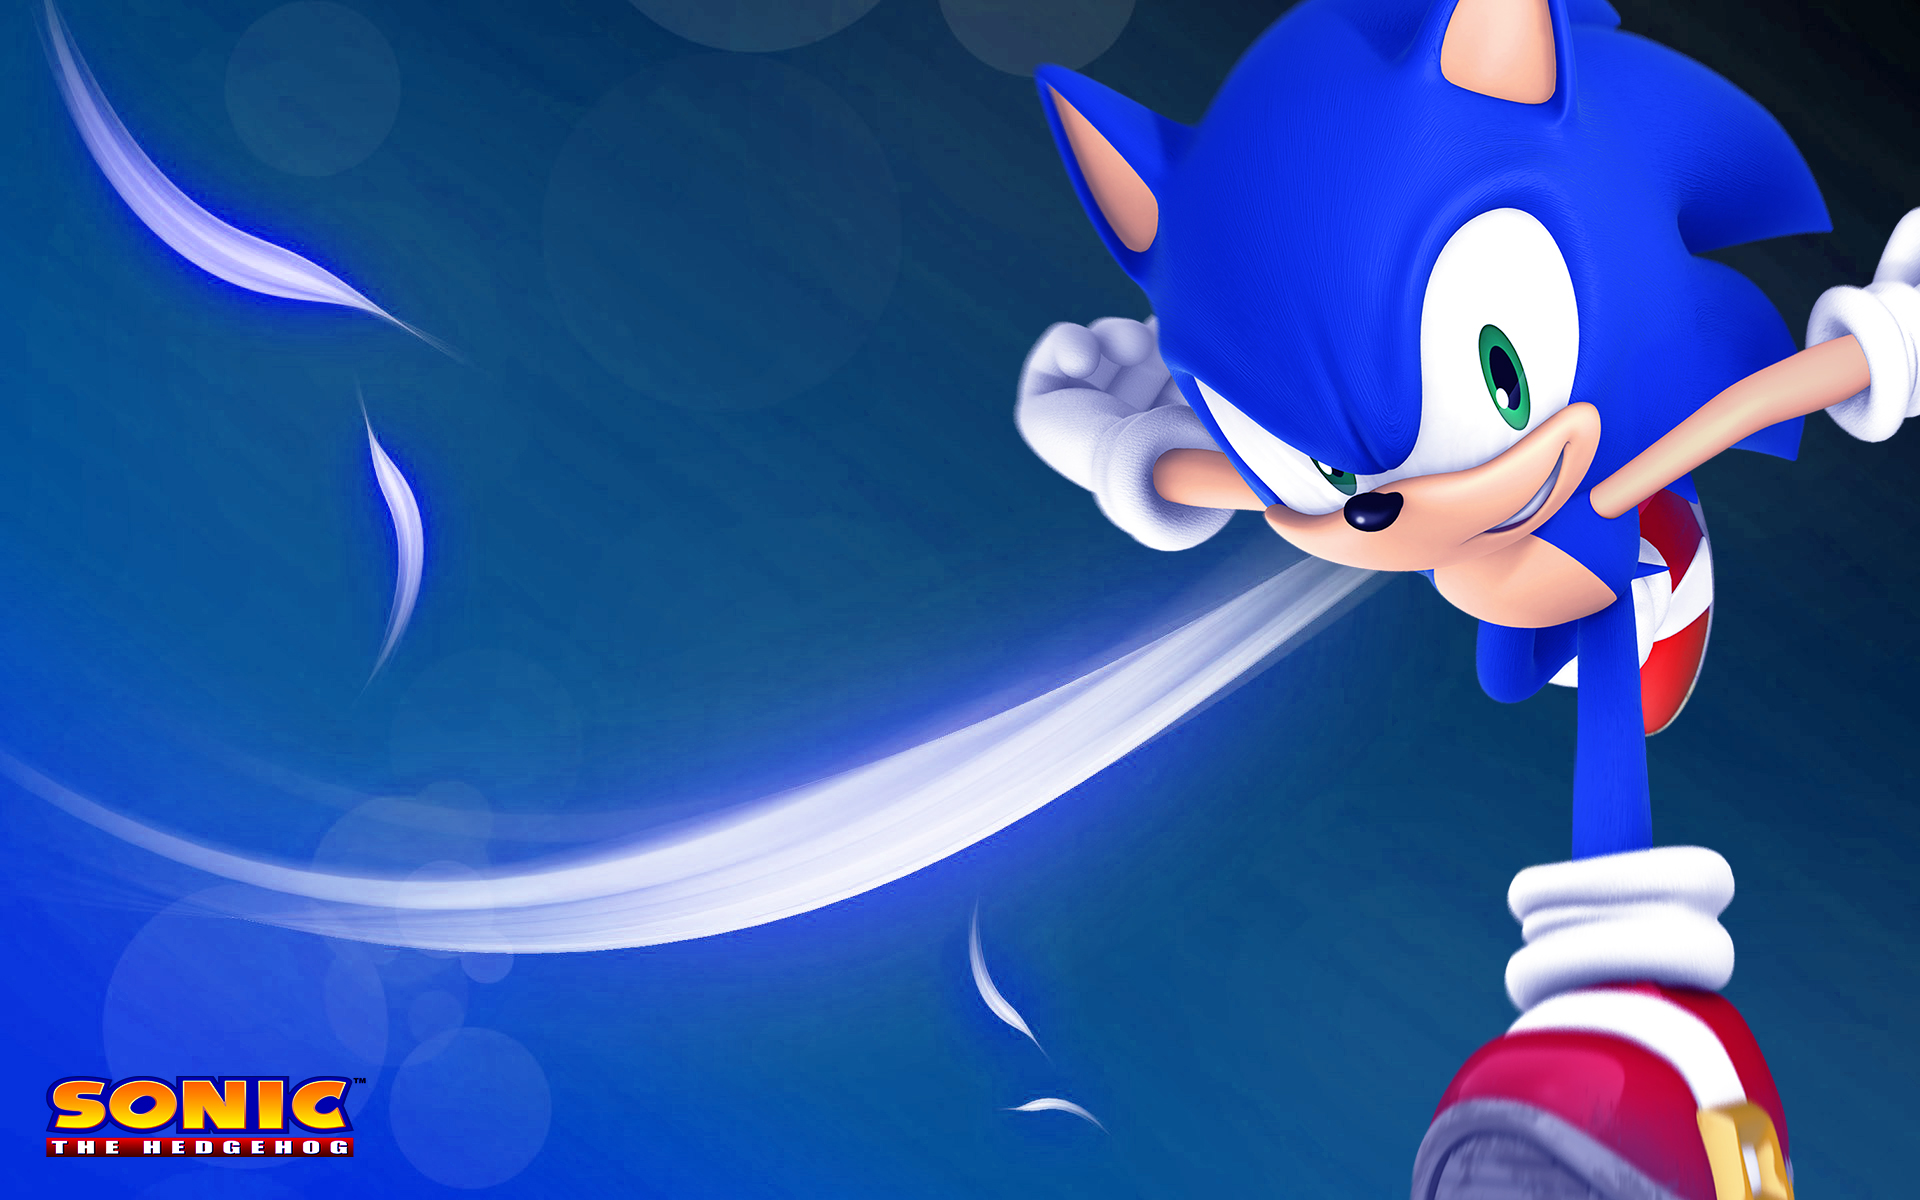 Sonic The Hedgehog Wallpaper HD Full Size Game